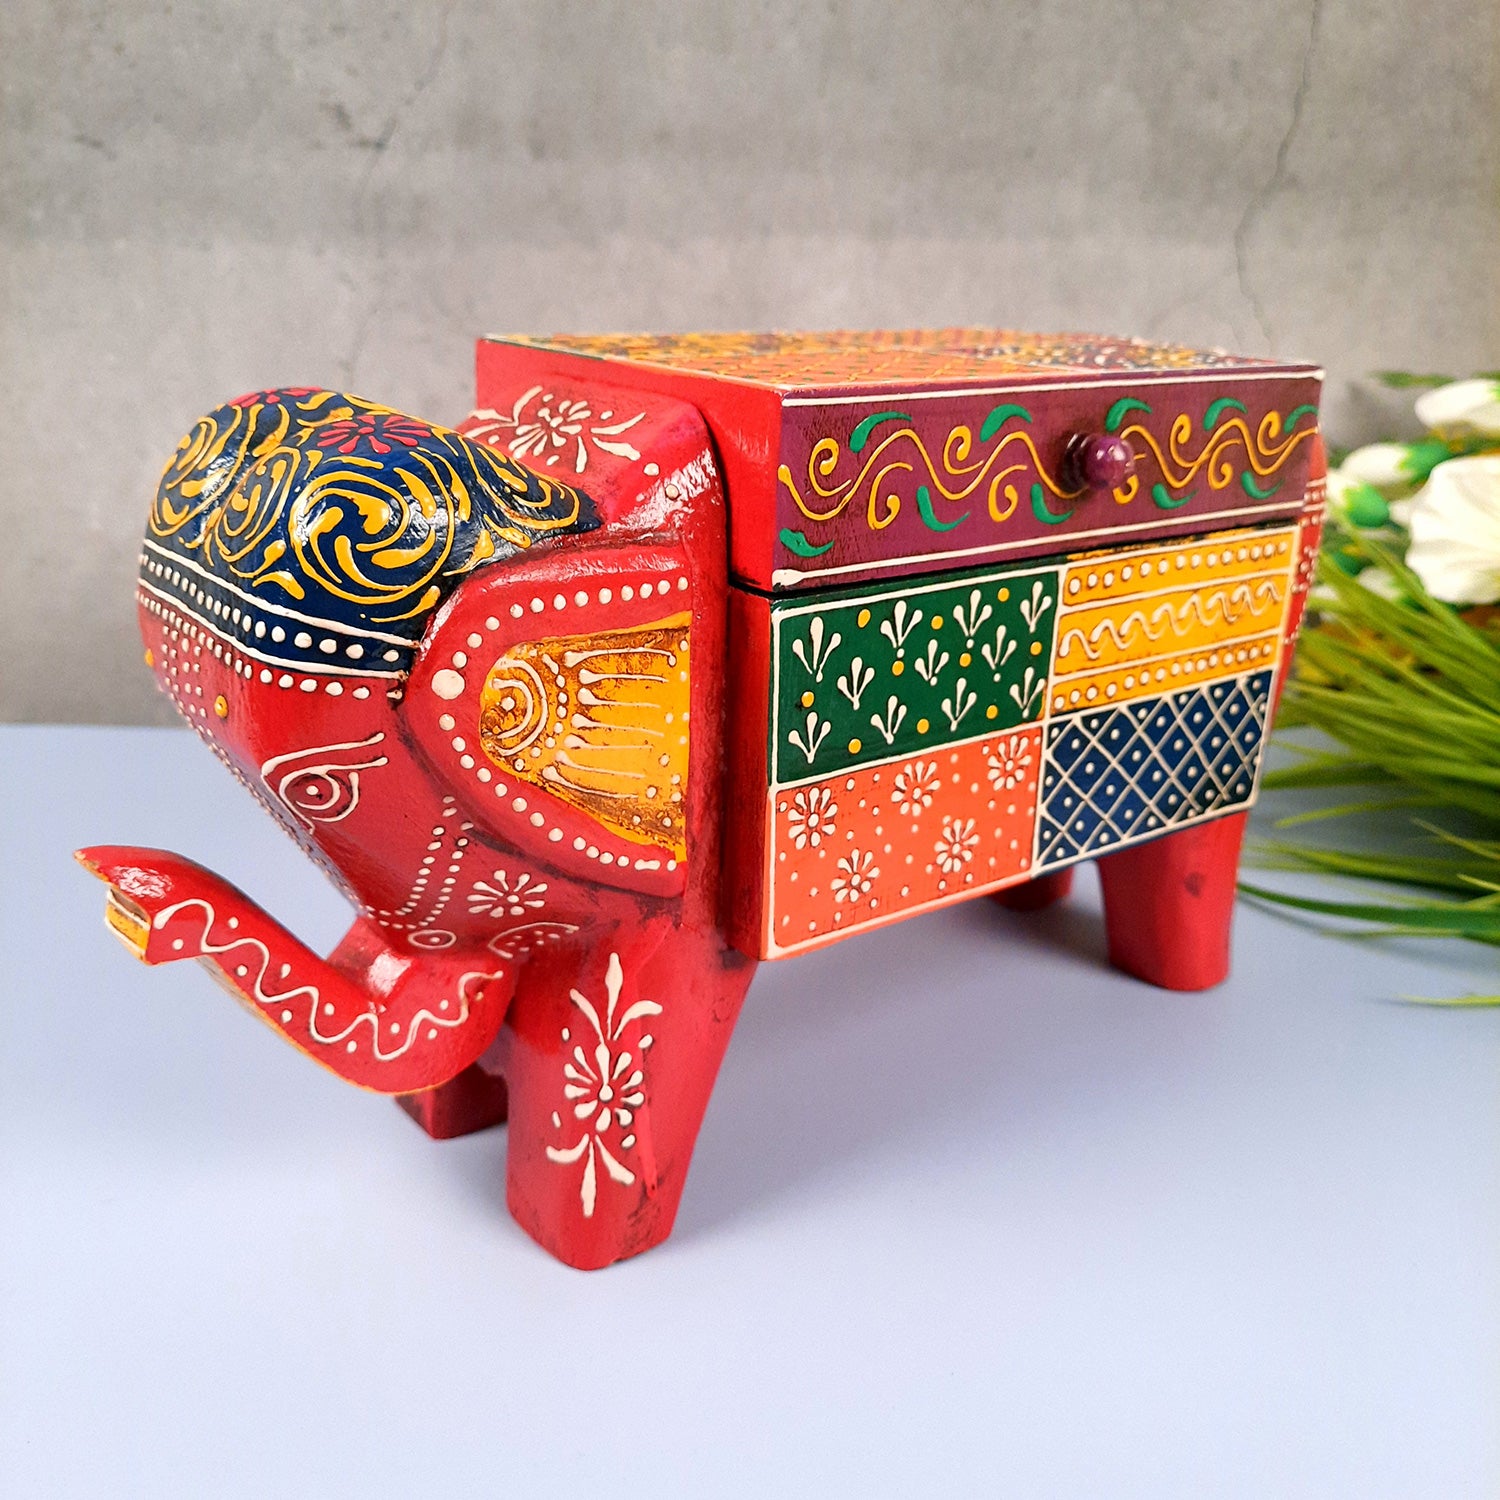 Jewellery Box - Elephant Design | Decorative Wooden Jewelry Box - For Earring, Necklace & Gifts - 11 Inch